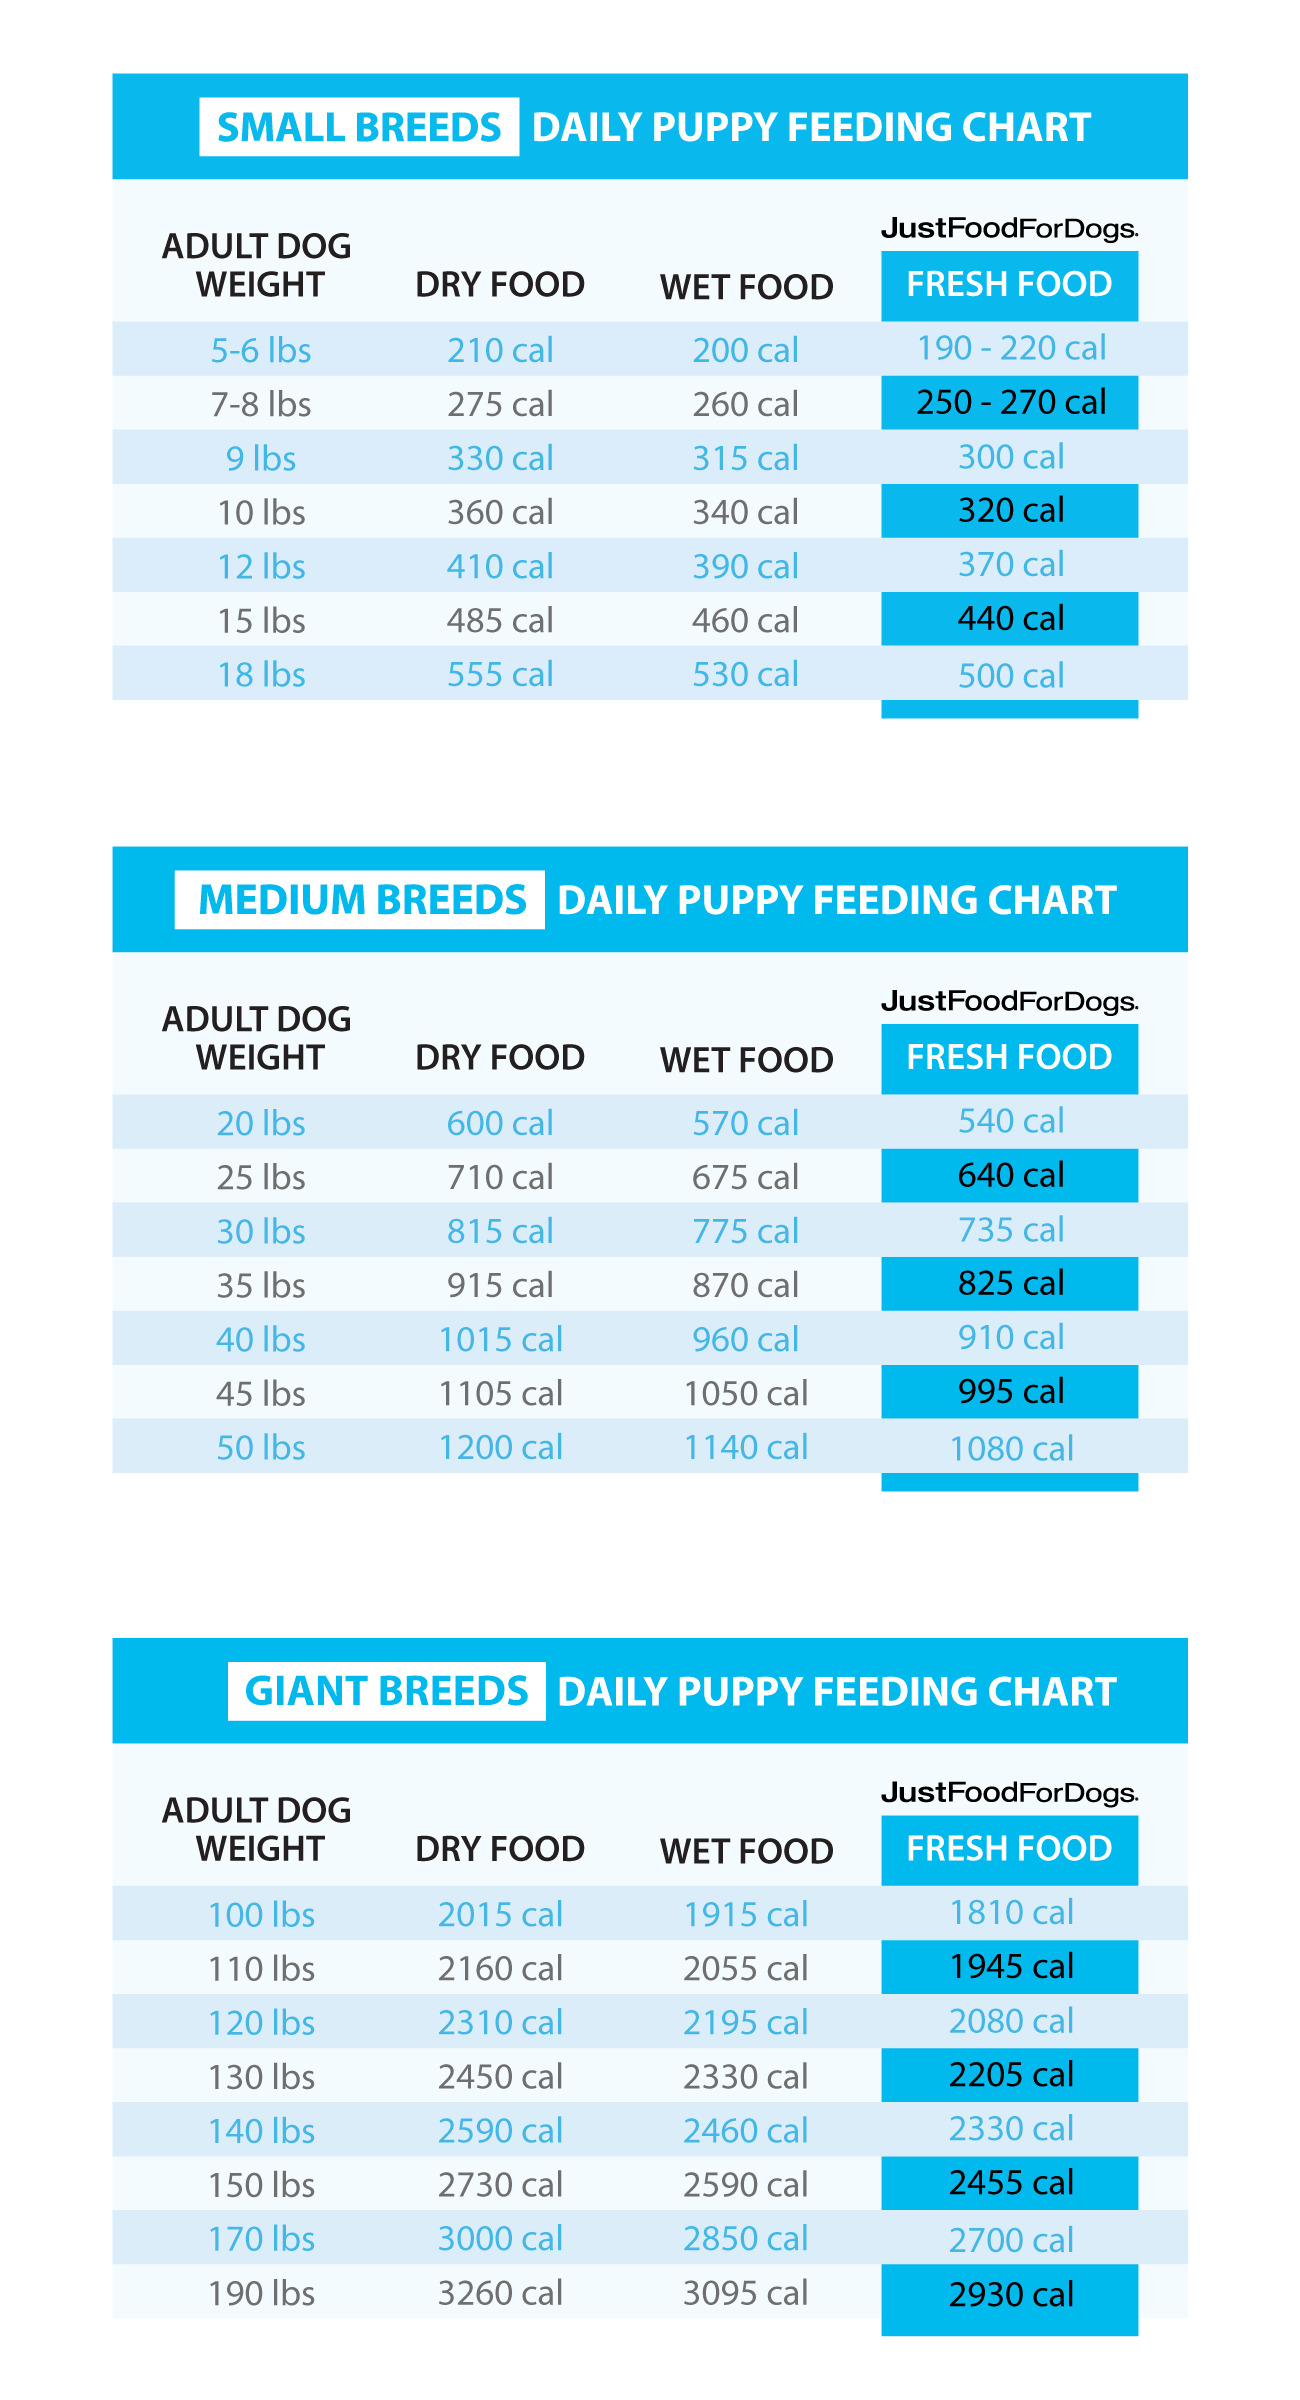 A dog's feeding schedule: when and how often to feed your dog